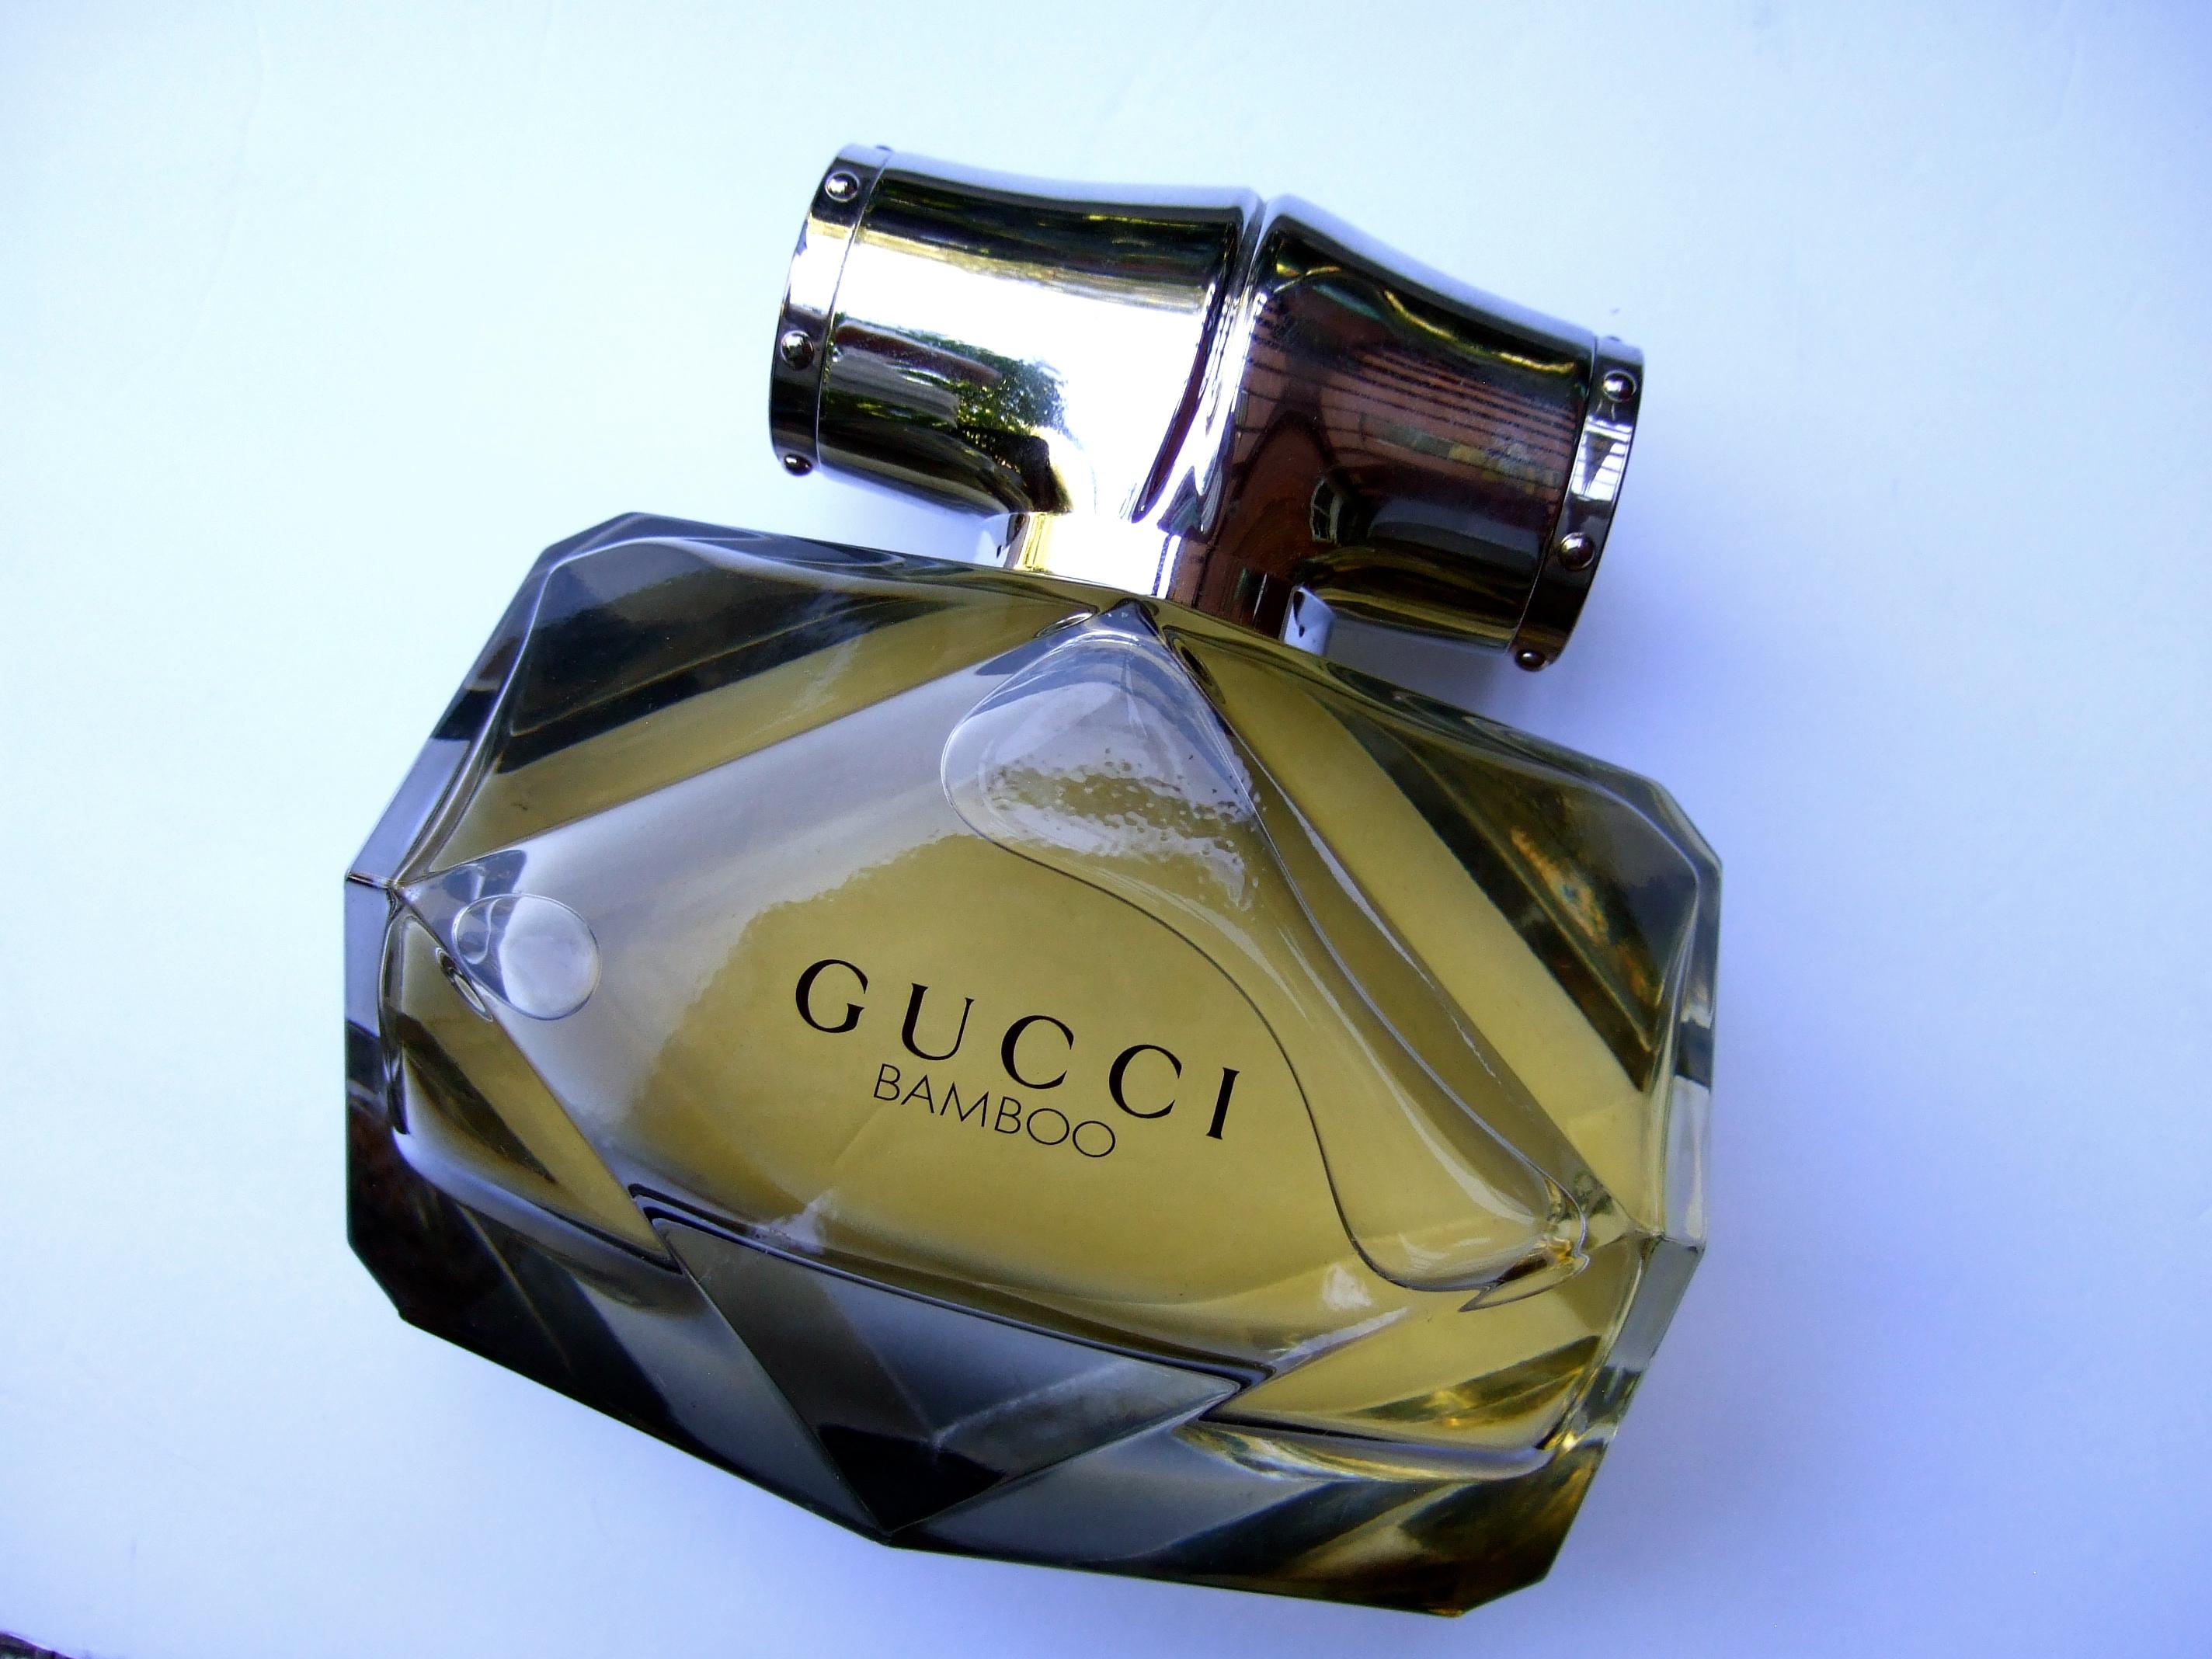 Gucci Bamboo Huge Glass Factice Faceted Display Decorative Bottle c 21st c  For Sale 1